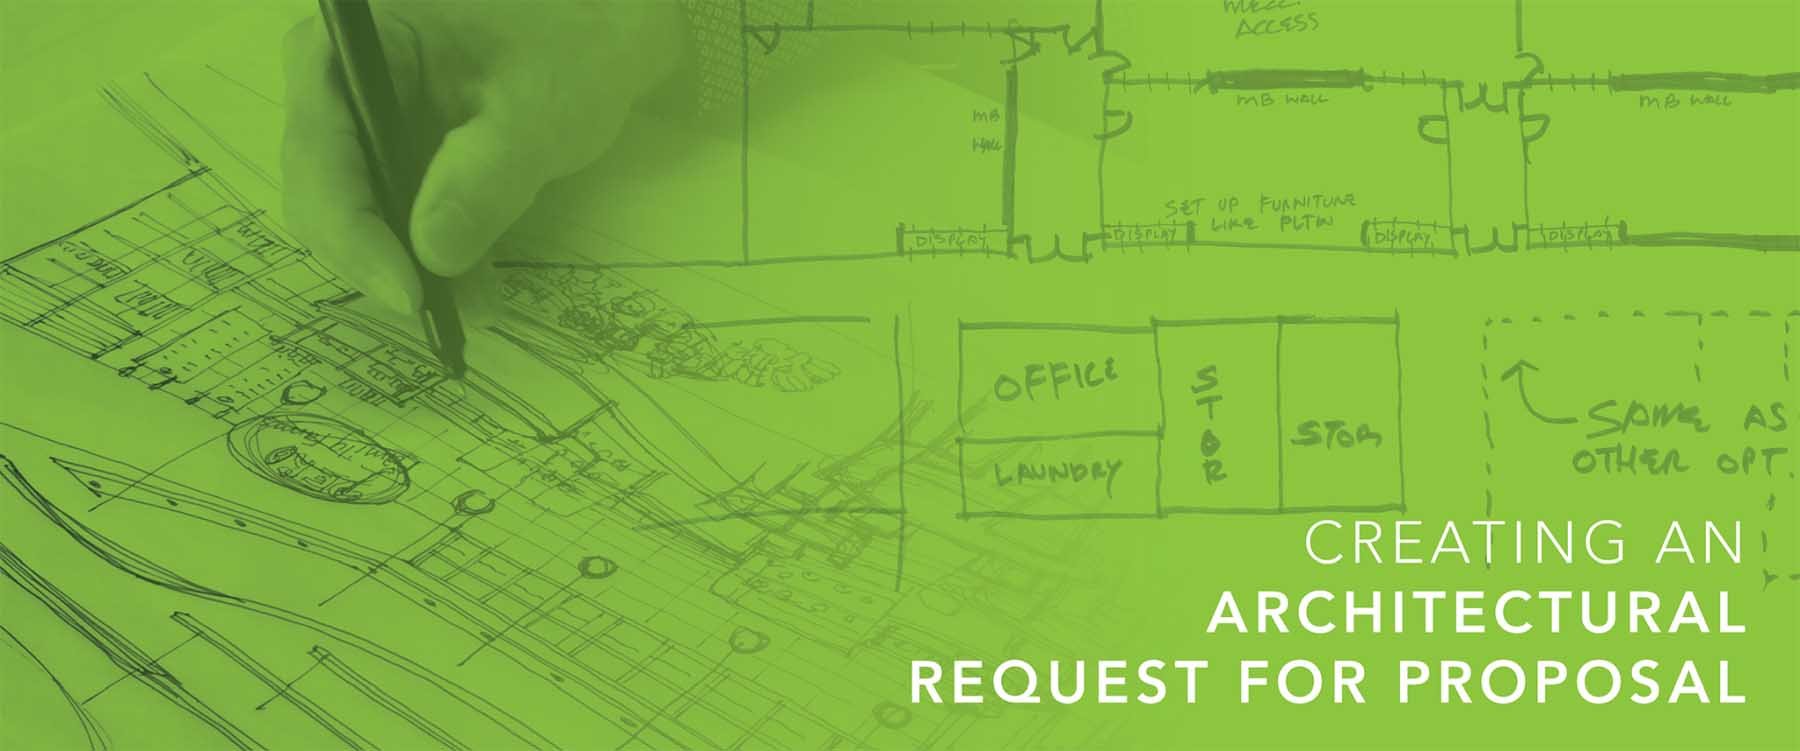 Ten considerations to create an objective Architectural RFP that produces accurate architectural proposals.